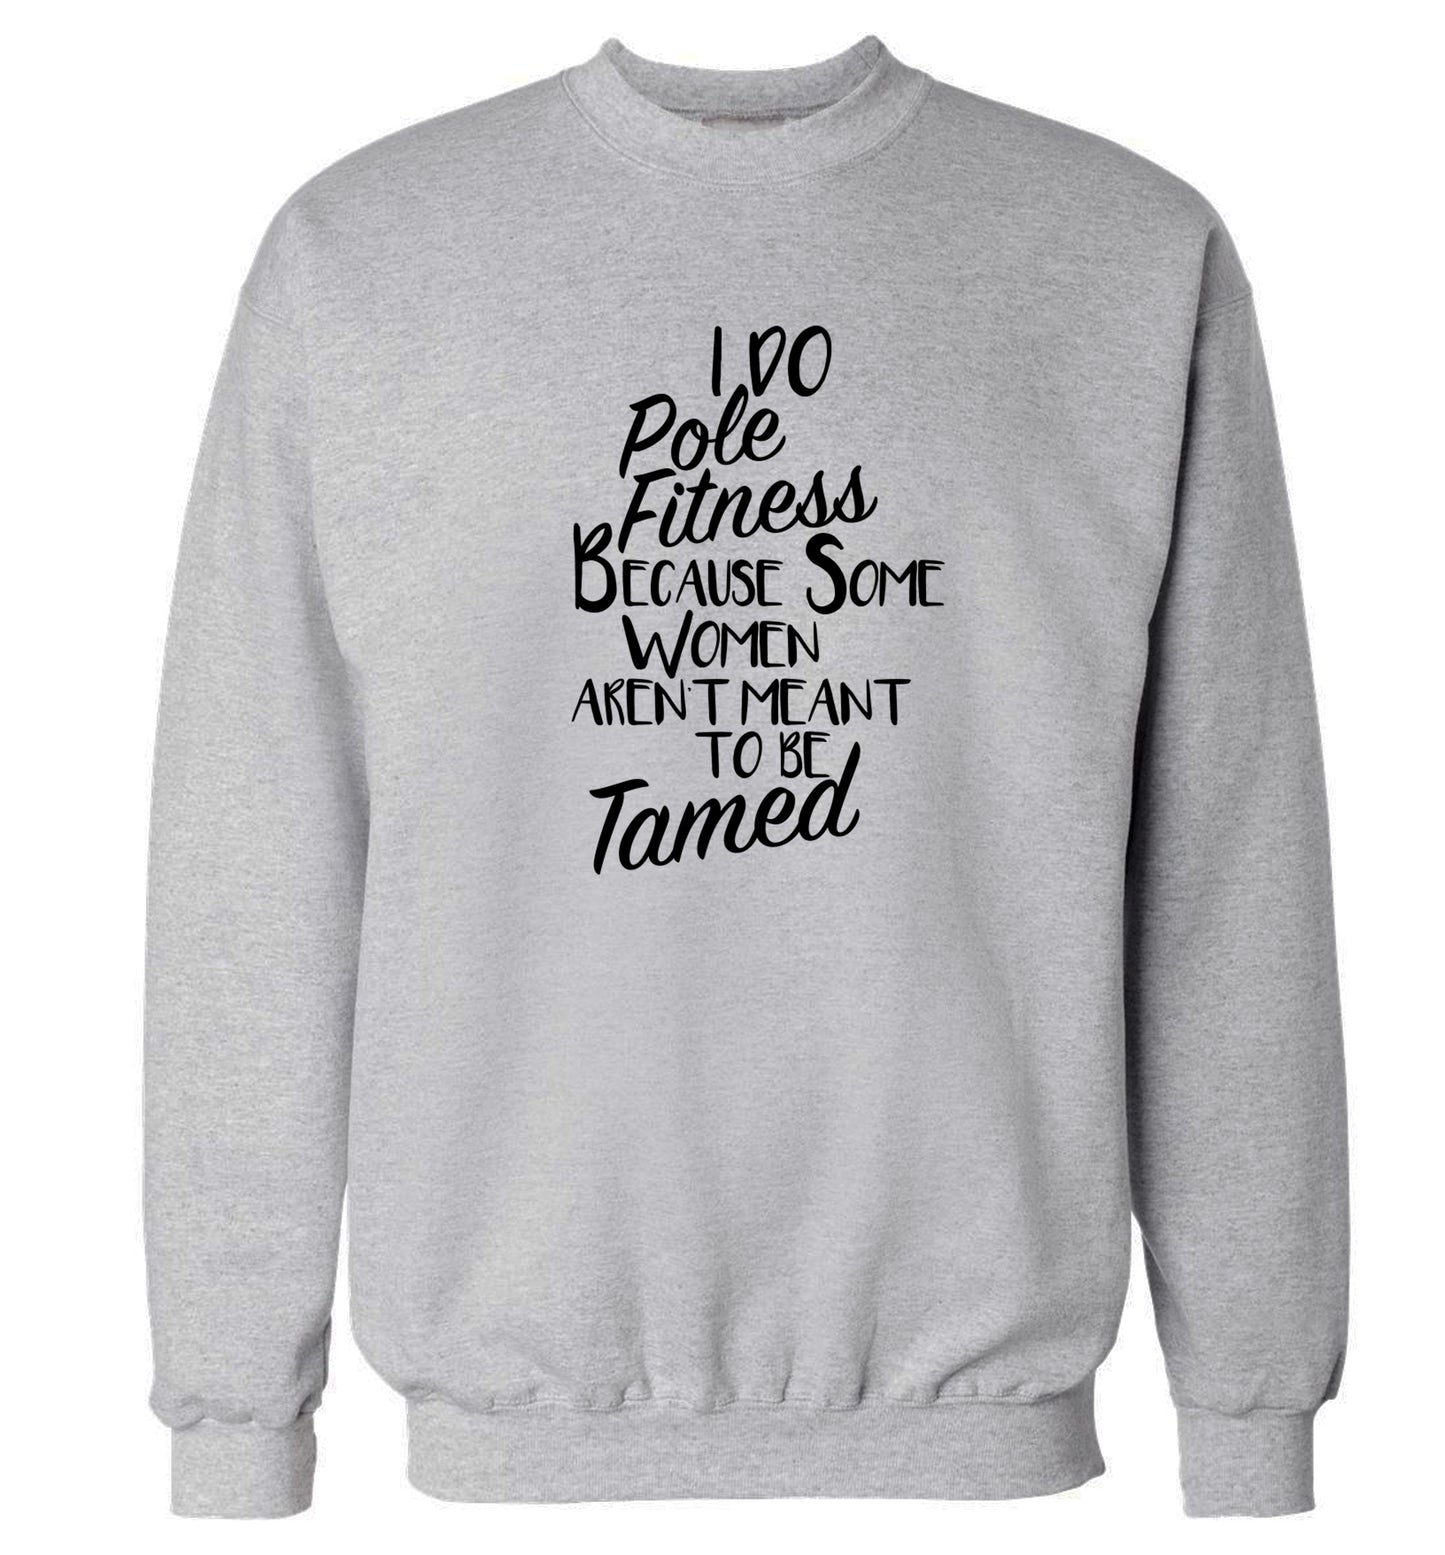 I do pole fitness because some women aren't meant to be tamed Adult's unisex grey Sweater 2XL